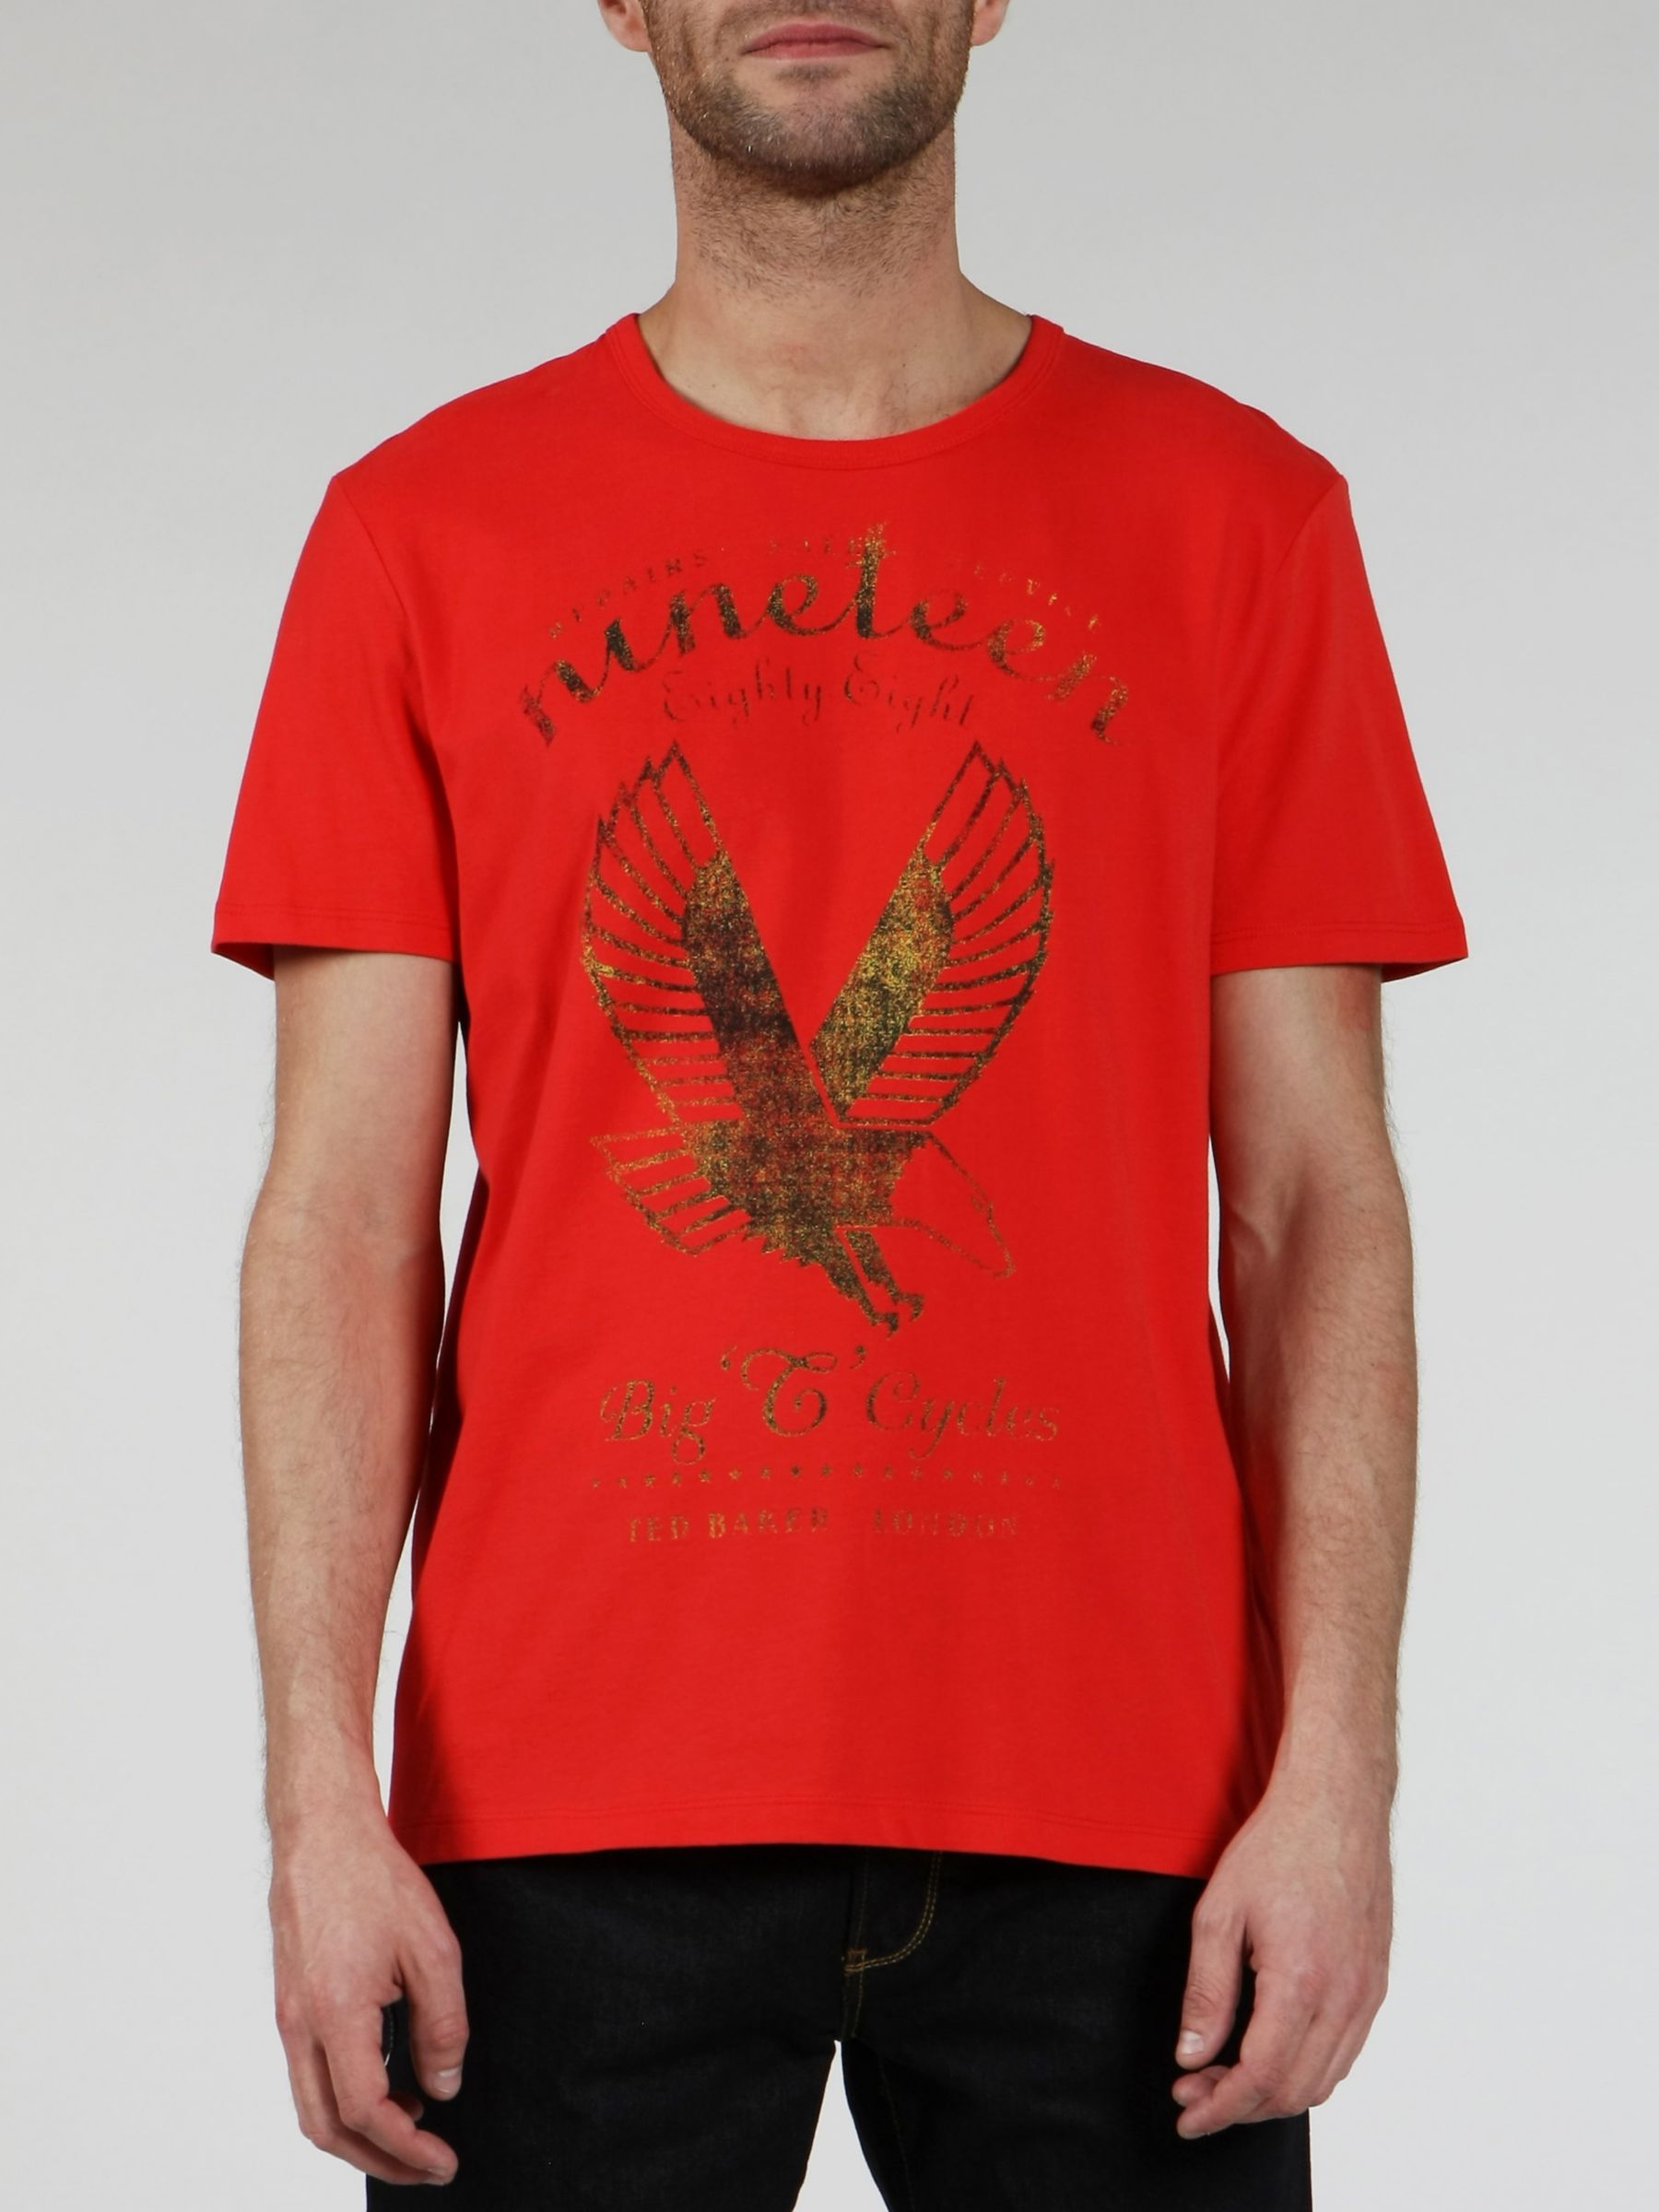 Short-Sleeve Graphic T-Shirt, Red